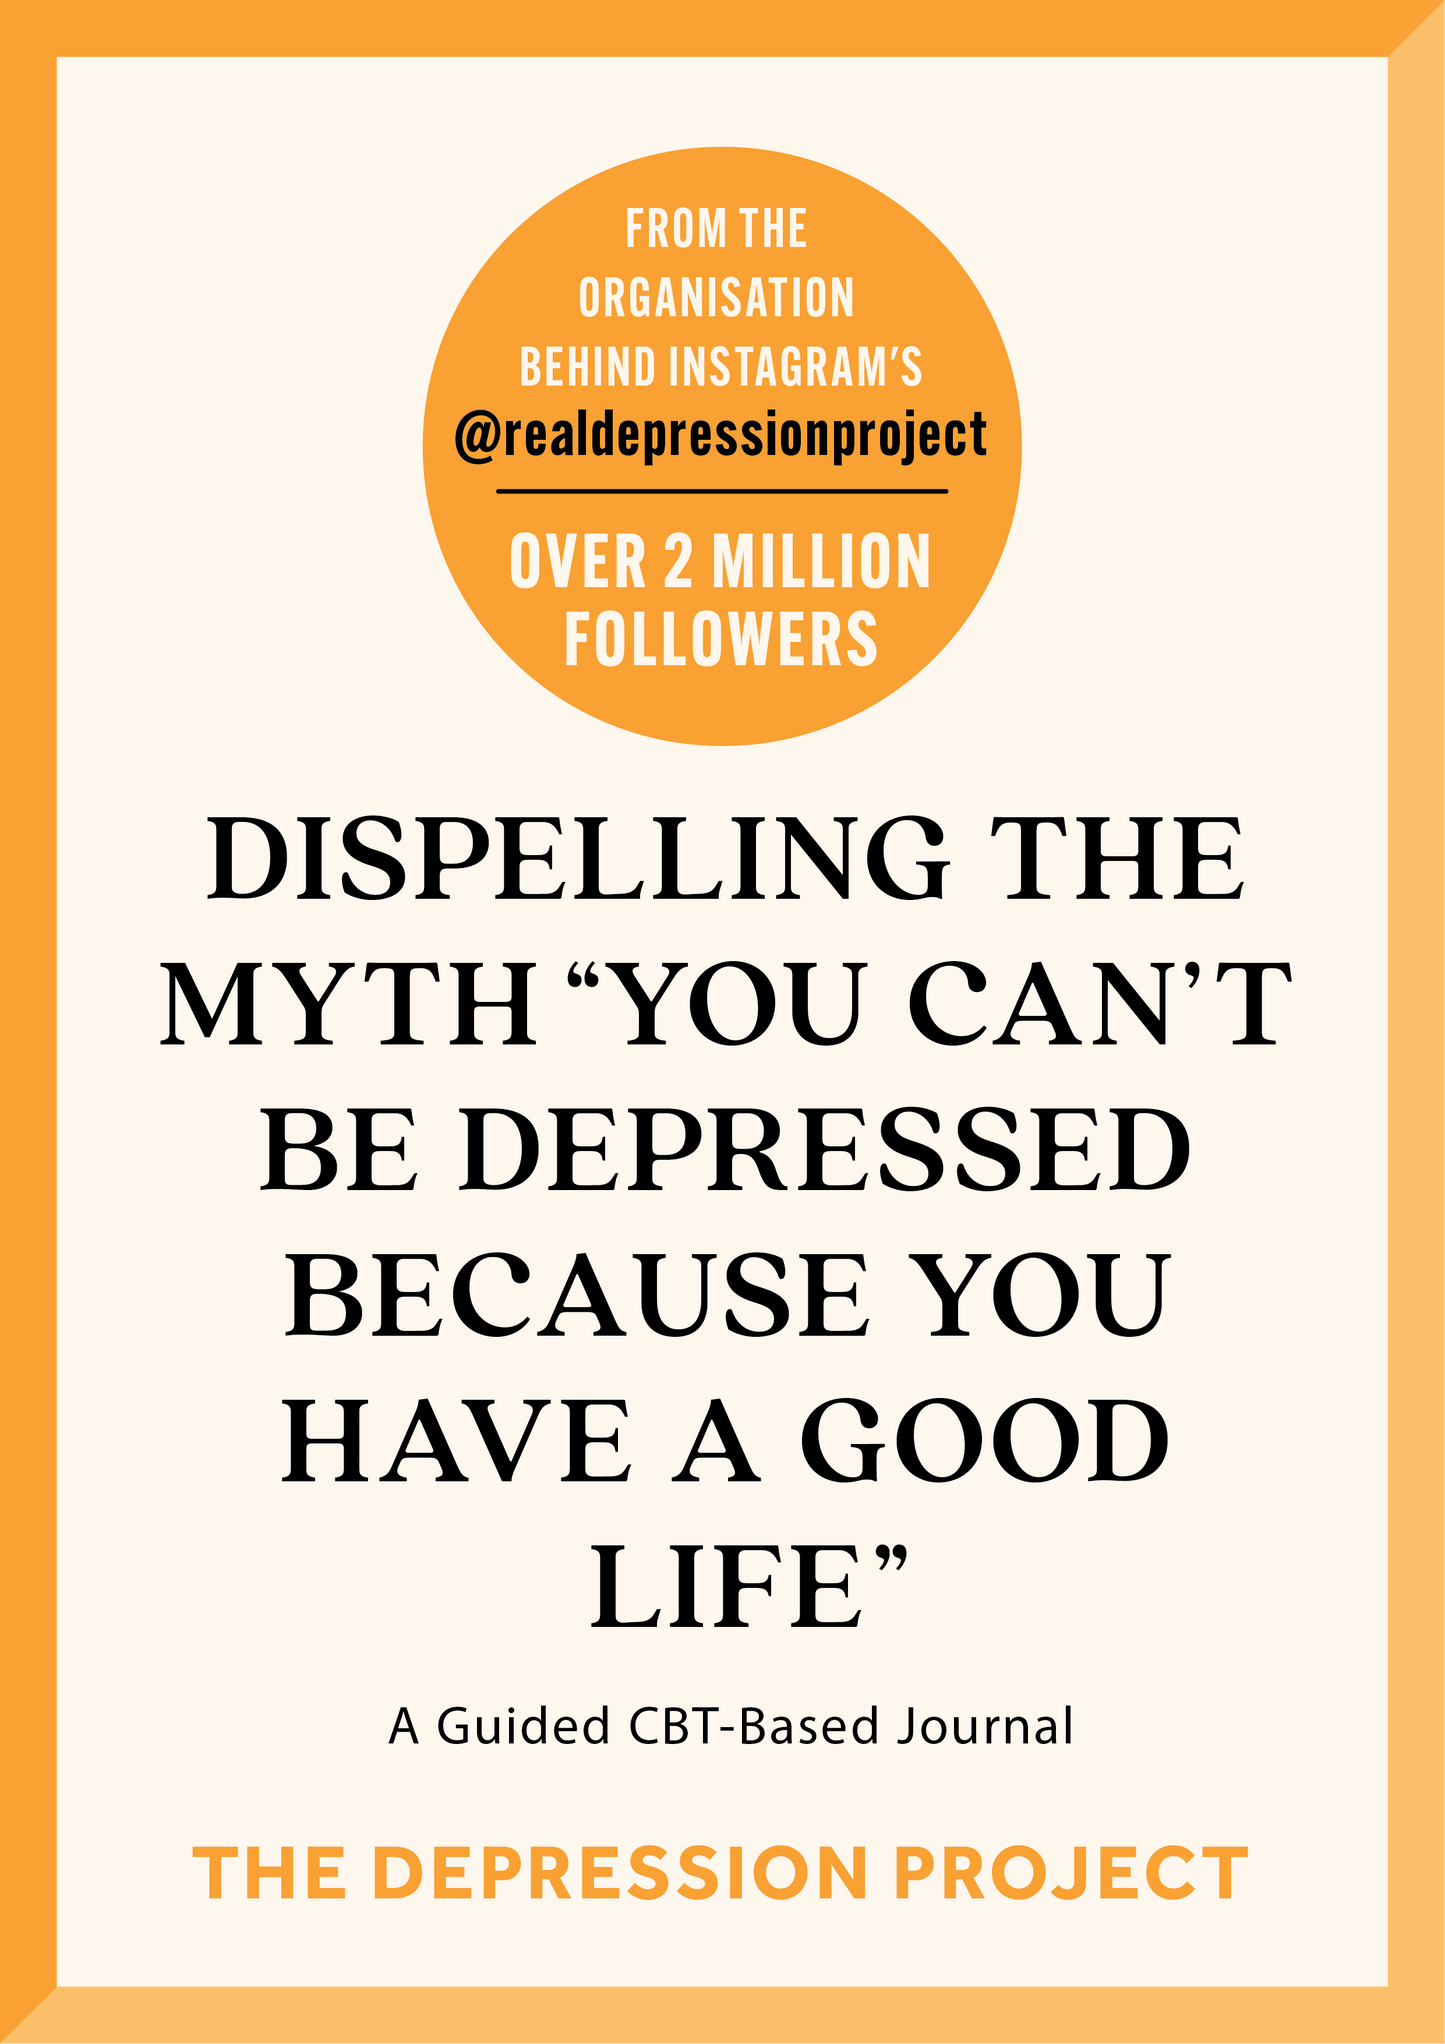 Dispelling The Myth “You Can’t Be Depressed Because You Have A Good Life”